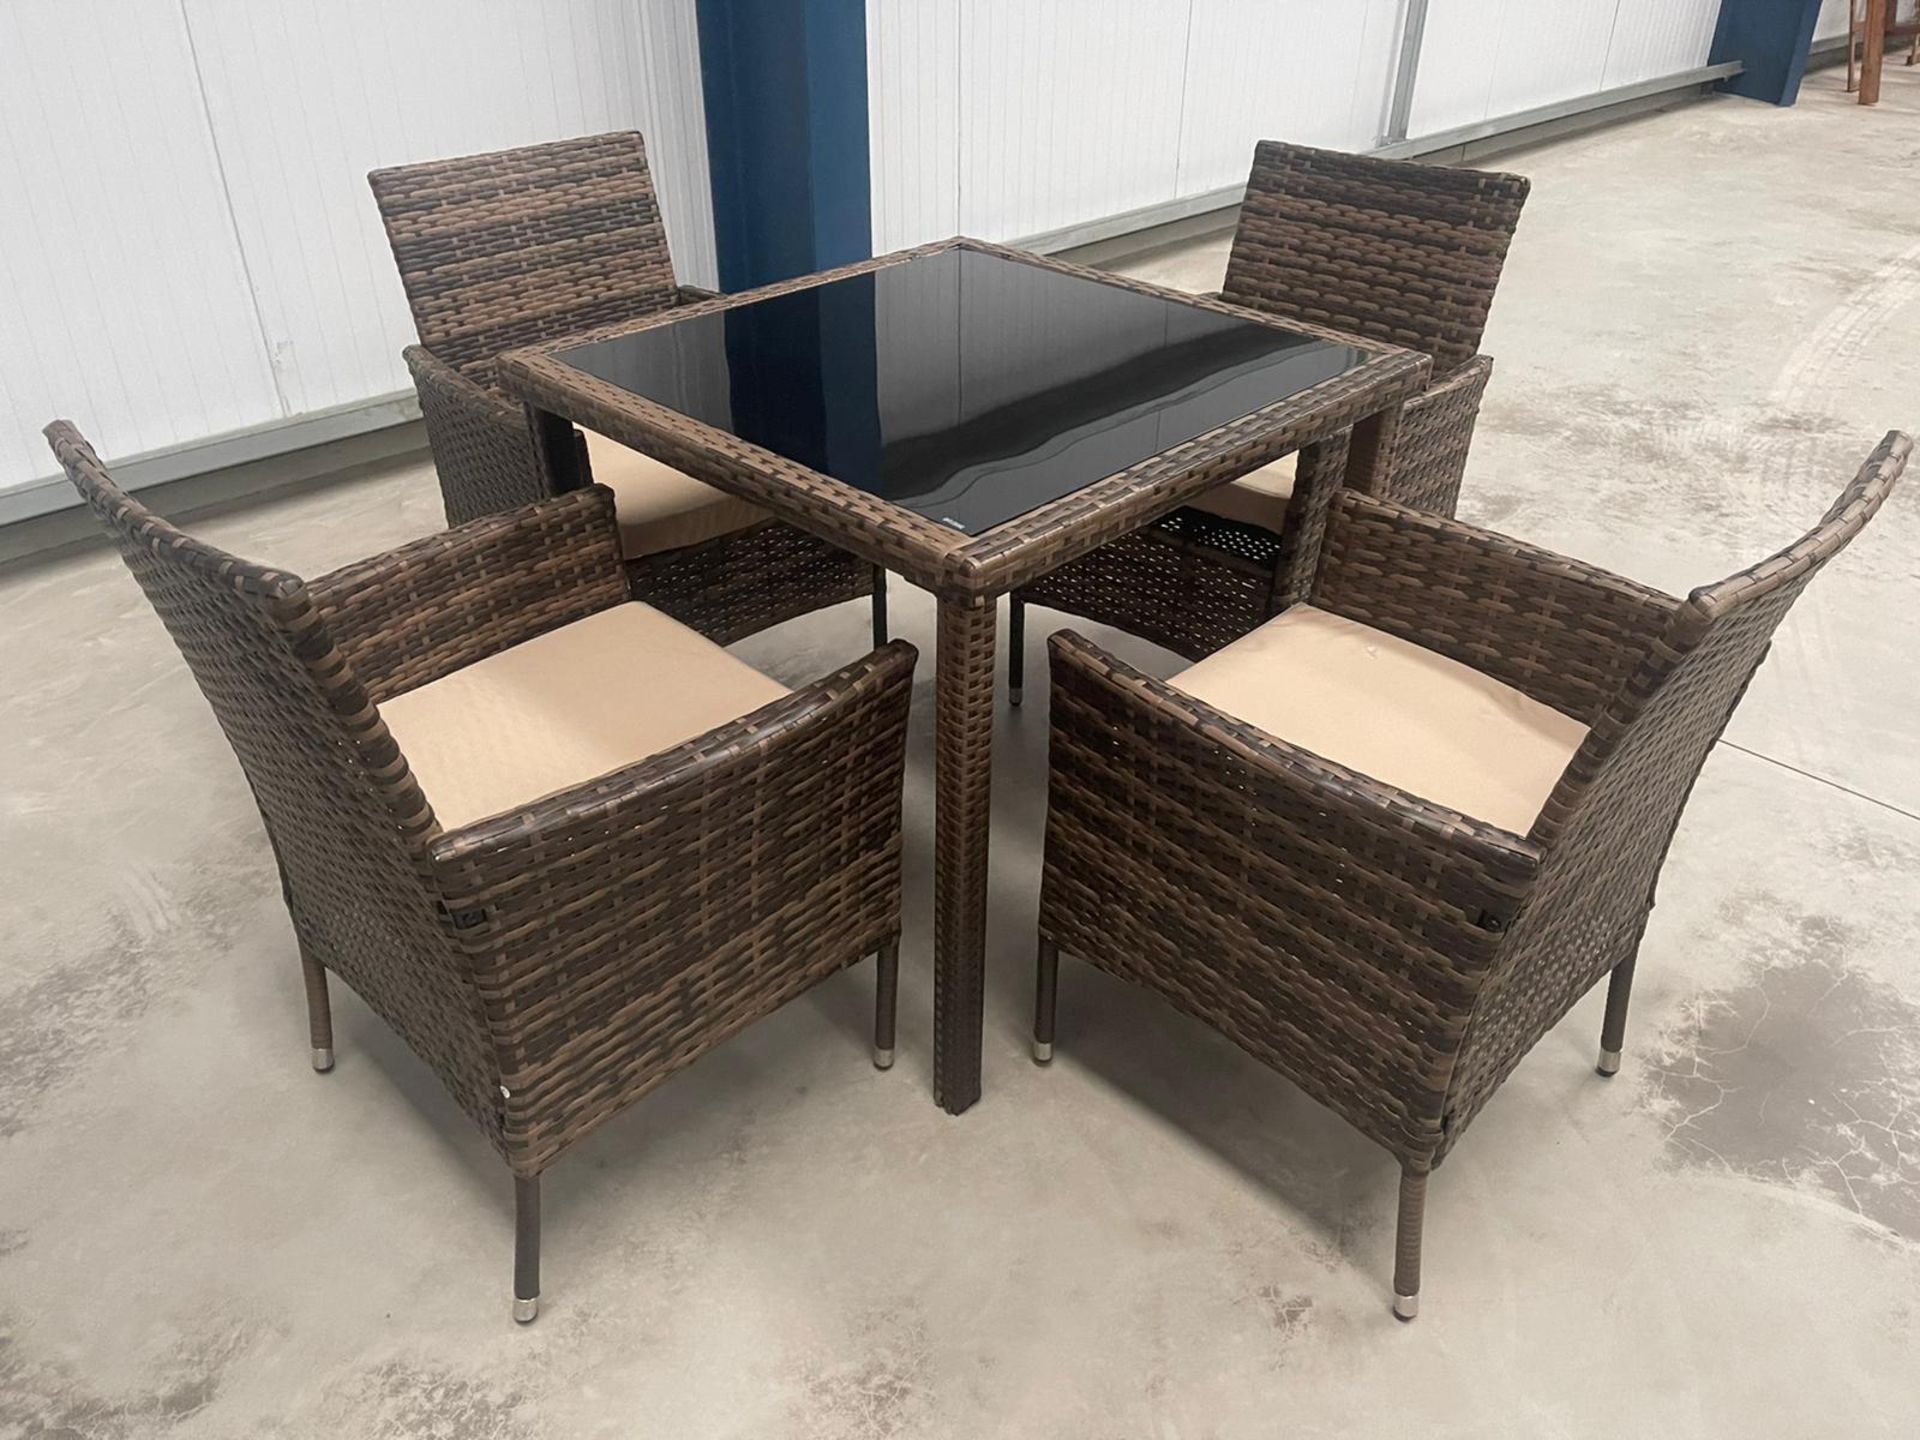 RRP £749 - NEW BROWN DINING SET WITH FOUR CHAIRS - LUXURY BLACK GLASS TOPPED DINING TABLE AND